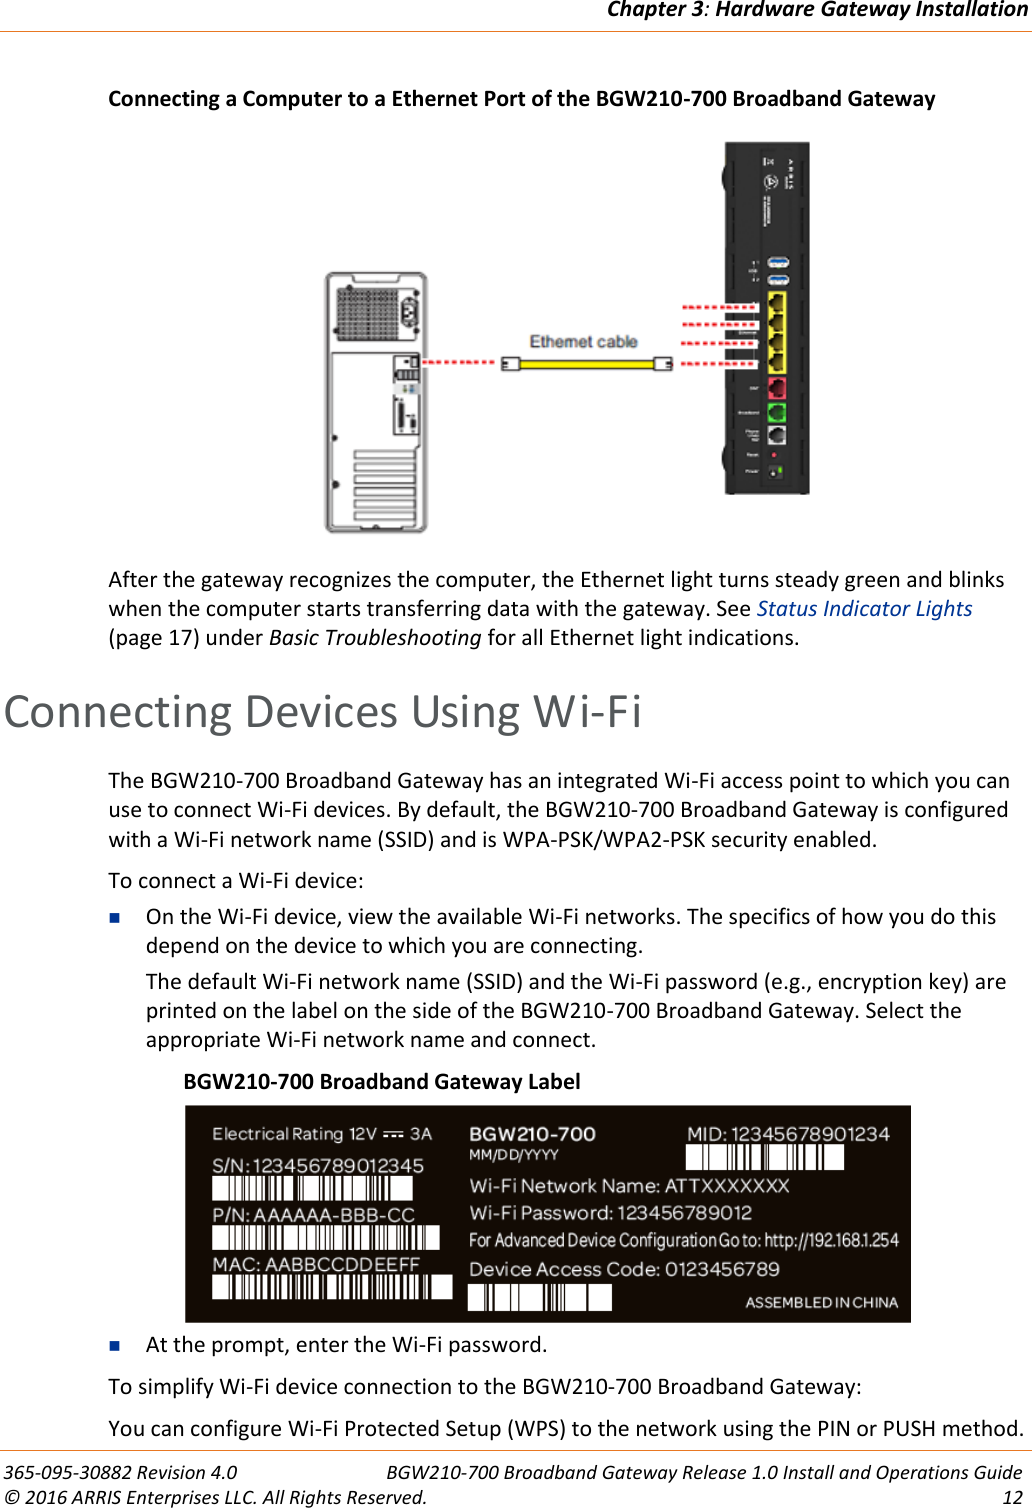 Chapter 3: Hardware Gateway Installation  365-095-30882 Revision 4.0  BGW210-700 Broadband Gateway Release 1.0 Install and Operations Guide © 2016 ARRIS Enterprises LLC. All Rights Reserved.  12  Connecting a Computer to a Ethernet Port of the BGW210-700 Broadband Gateway  After the gateway recognizes the computer, the Ethernet light turns steady green and blinks when the computer starts transferring data with the gateway. See Status Indicator Lights (page 17) under Basic Troubleshooting for all Ethernet light indications.   Connecting Devices Using Wi-Fi The BGW210-700 Broadband Gateway has an integrated Wi-Fi access point to which you can use to connect Wi-Fi devices. By default, the BGW210-700 Broadband Gateway is configured with a Wi-Fi network name (SSID) and is WPA-PSK/WPA2-PSK security enabled. To connect a Wi-Fi device:  On the Wi-Fi device, view the available Wi-Fi networks. The specifics of how you do this depend on the device to which you are connecting. The default Wi-Fi network name (SSID) and the Wi-Fi password (e.g., encryption key) are printed on the label on the side of the BGW210-700 Broadband Gateway. Select the appropriate Wi-Fi network name and connect.   BGW210-700 Broadband Gateway Label   At the prompt, enter the Wi-Fi password. To simplify Wi-Fi device connection to the BGW210-700 Broadband Gateway: You can configure Wi-Fi Protected Setup (WPS) to the network using the PIN or PUSH method. 